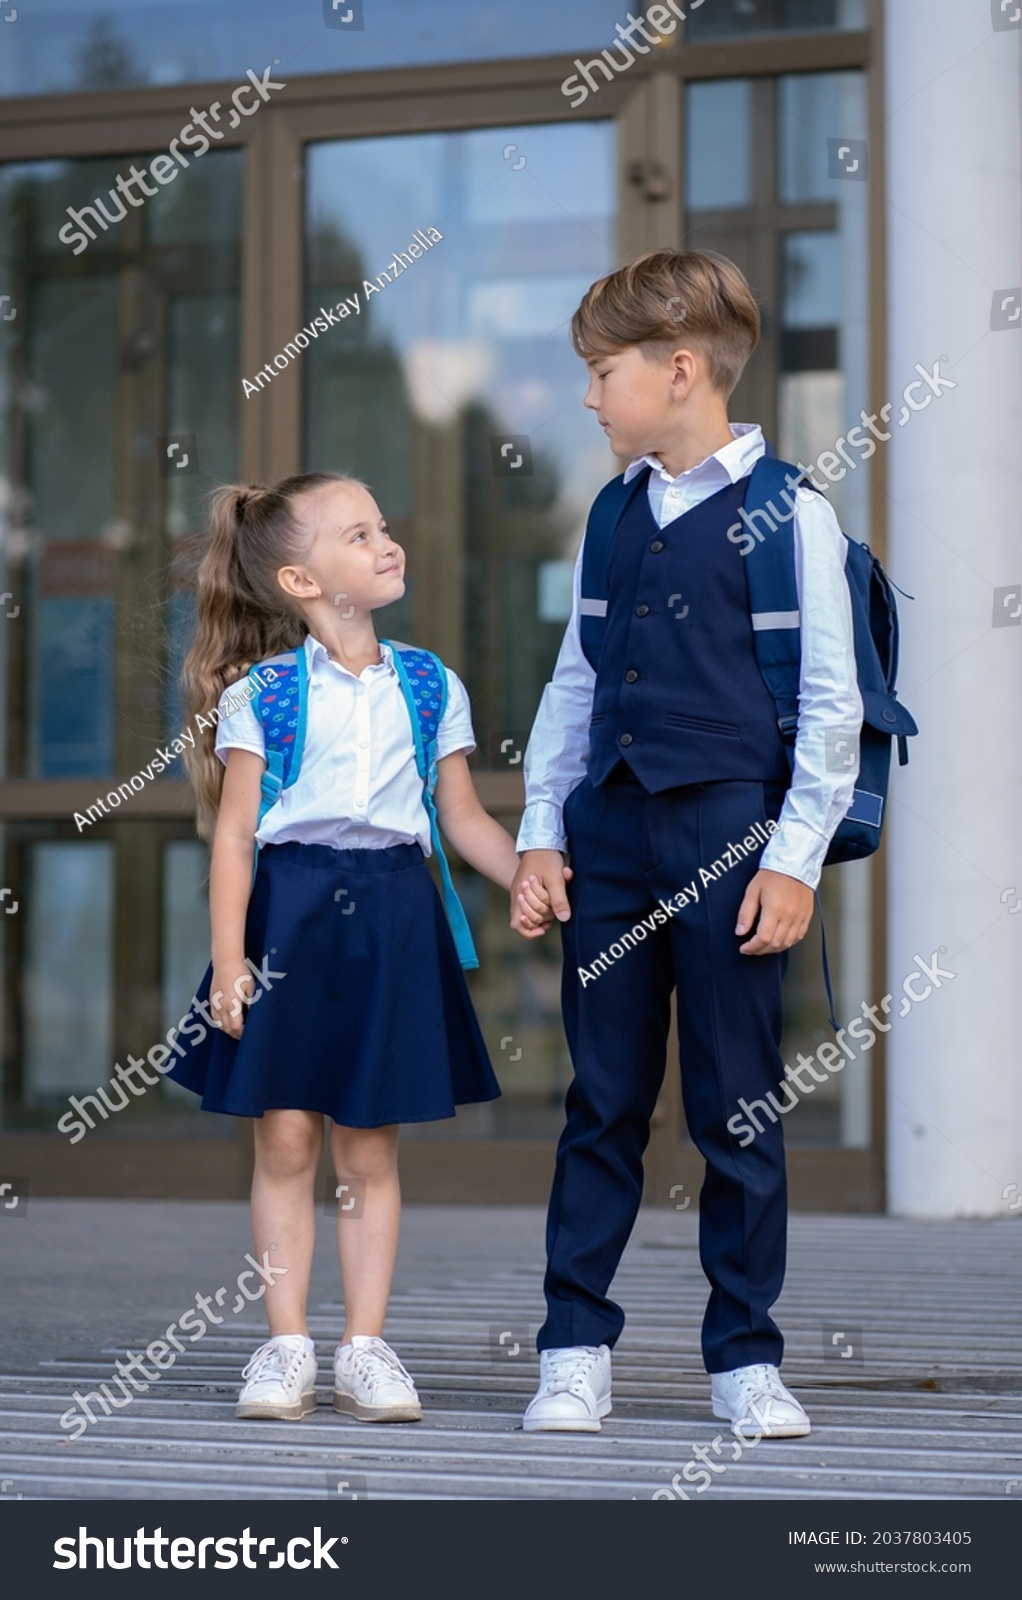 Elder brother and little sister stand in front of the school building holding hands #2037803405